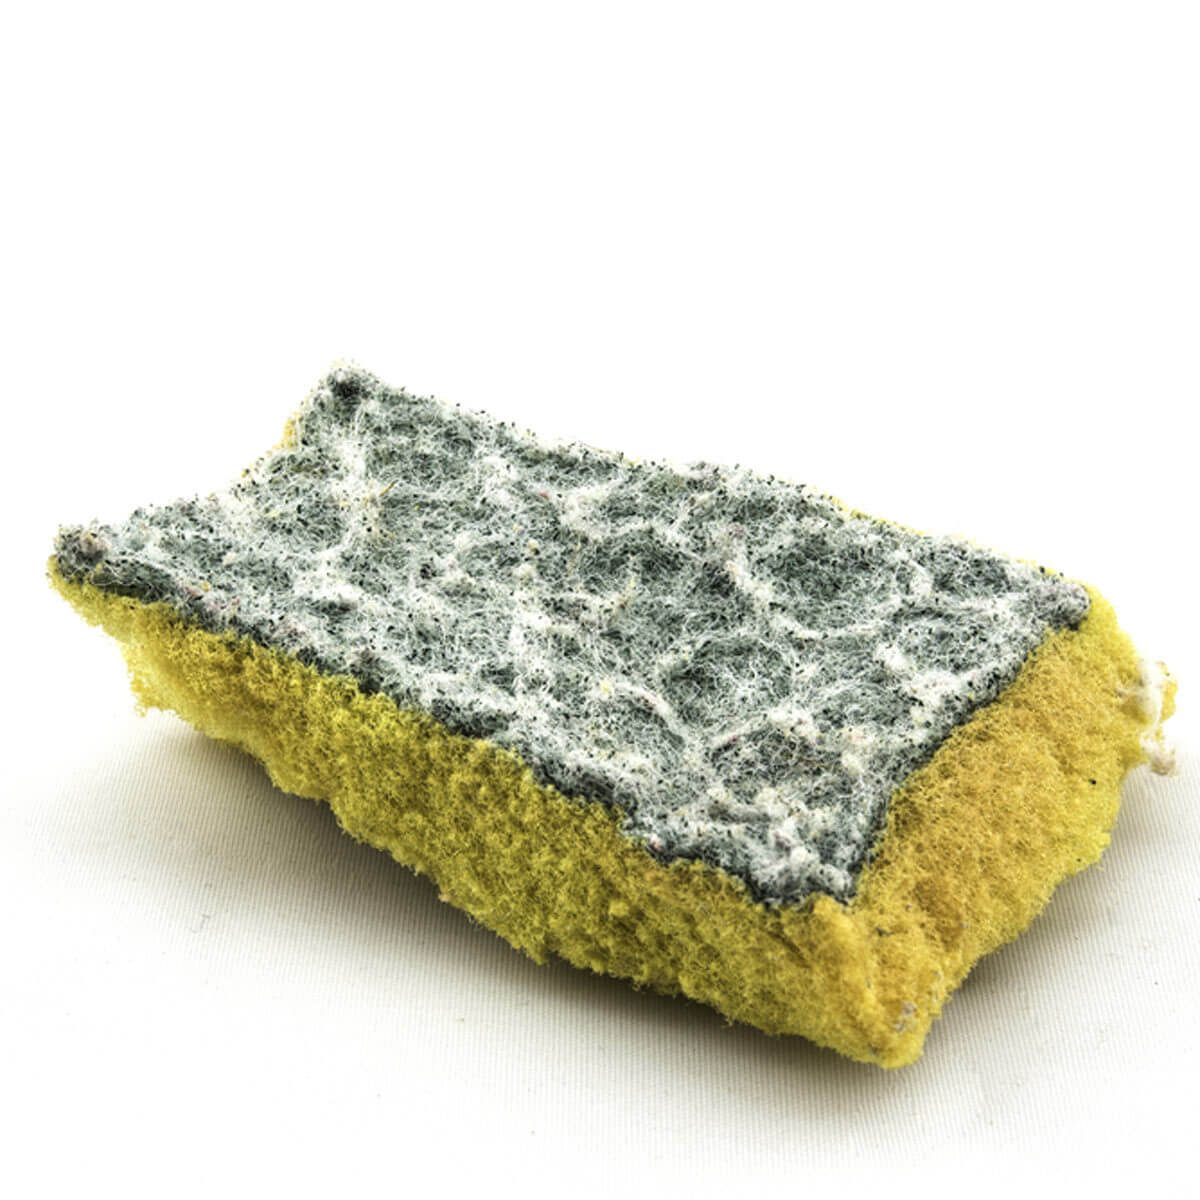 Sponges always stink after just a few cleans! What to do? : r